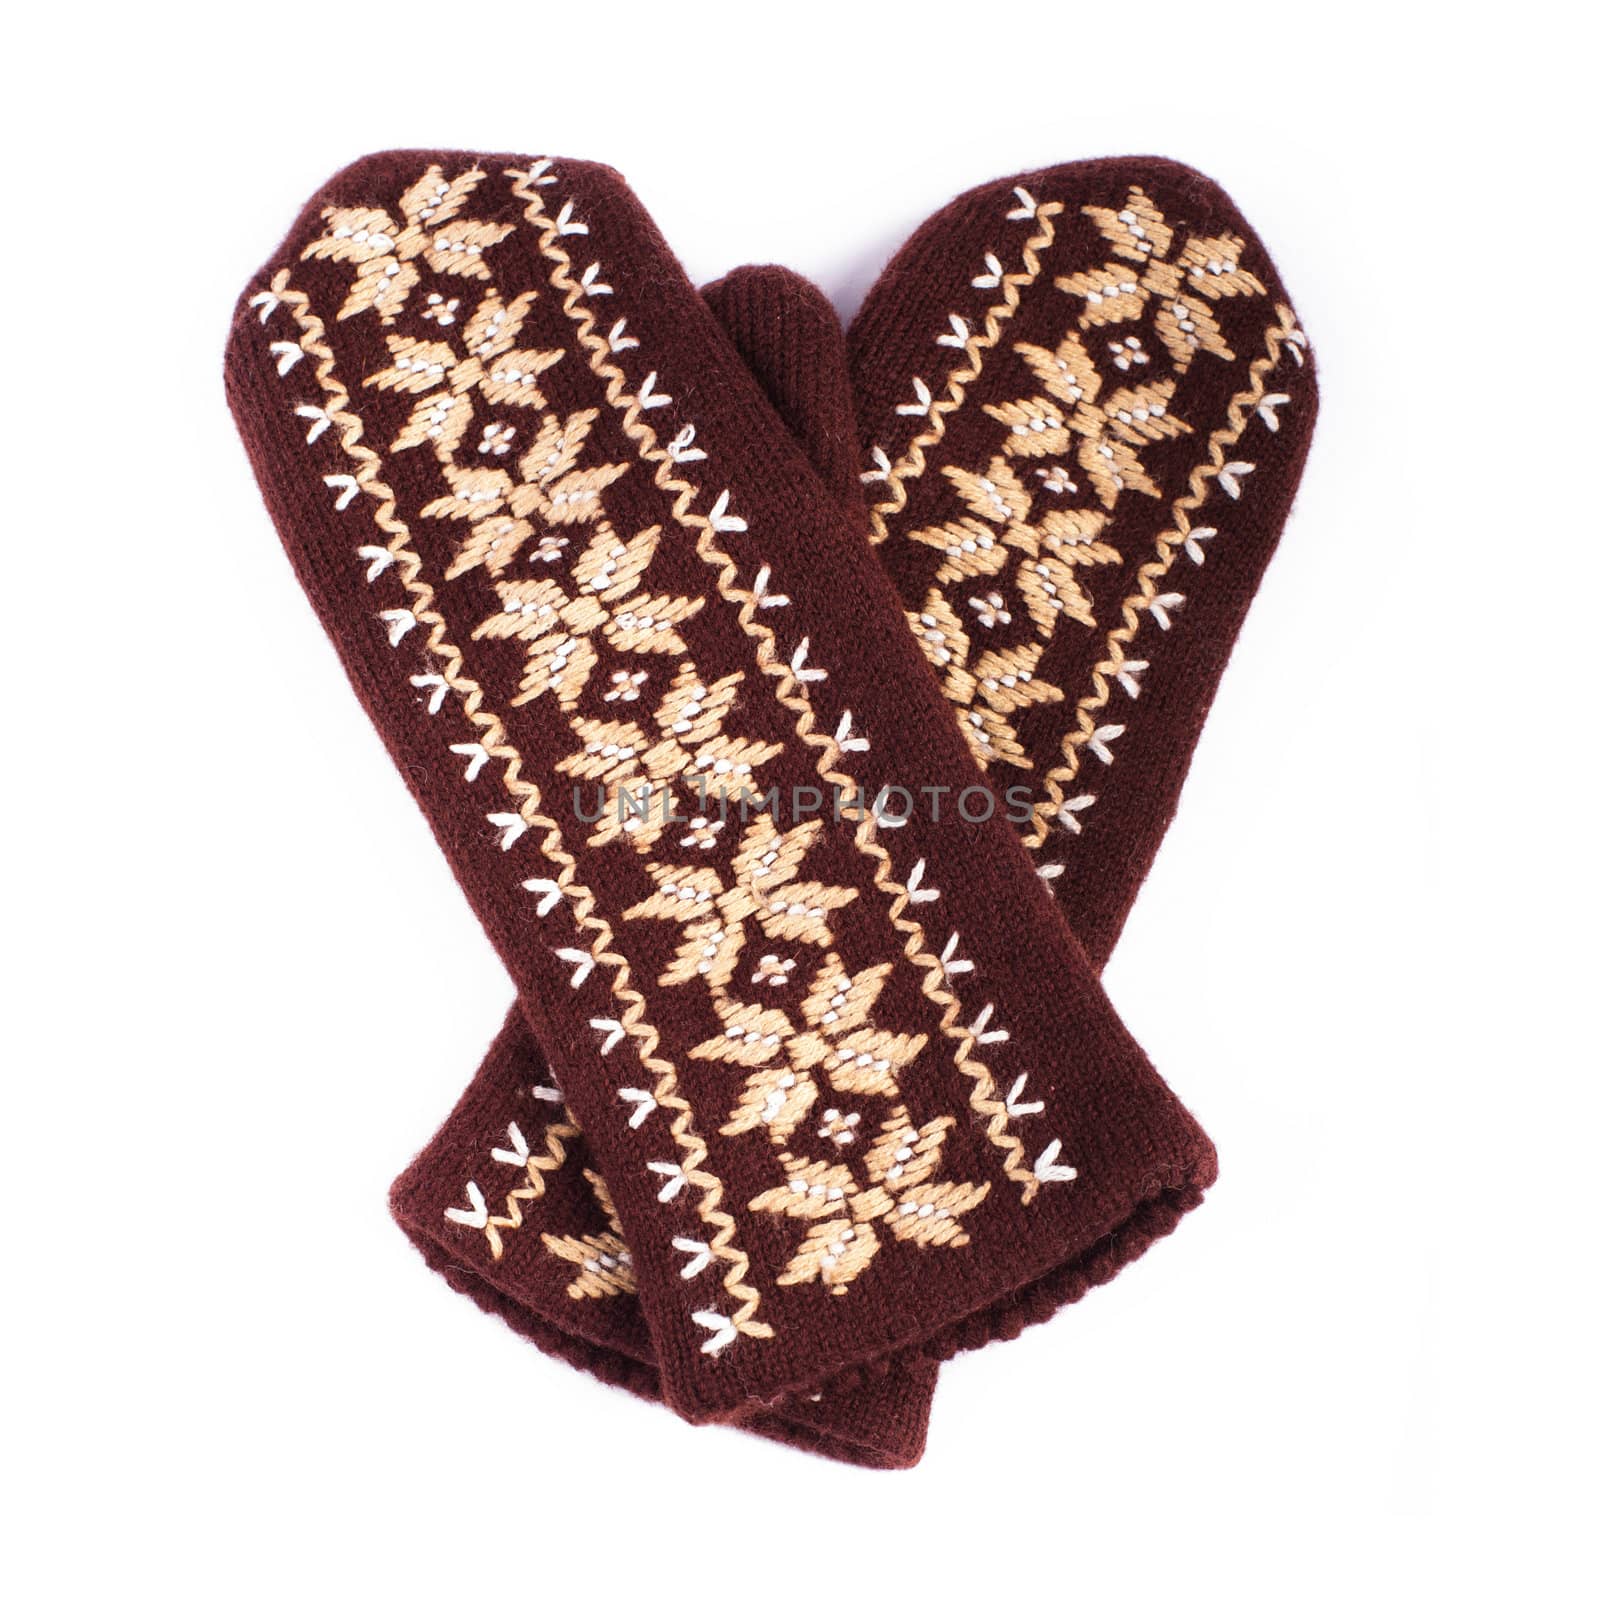 Brown woolen knitted mittens on white background